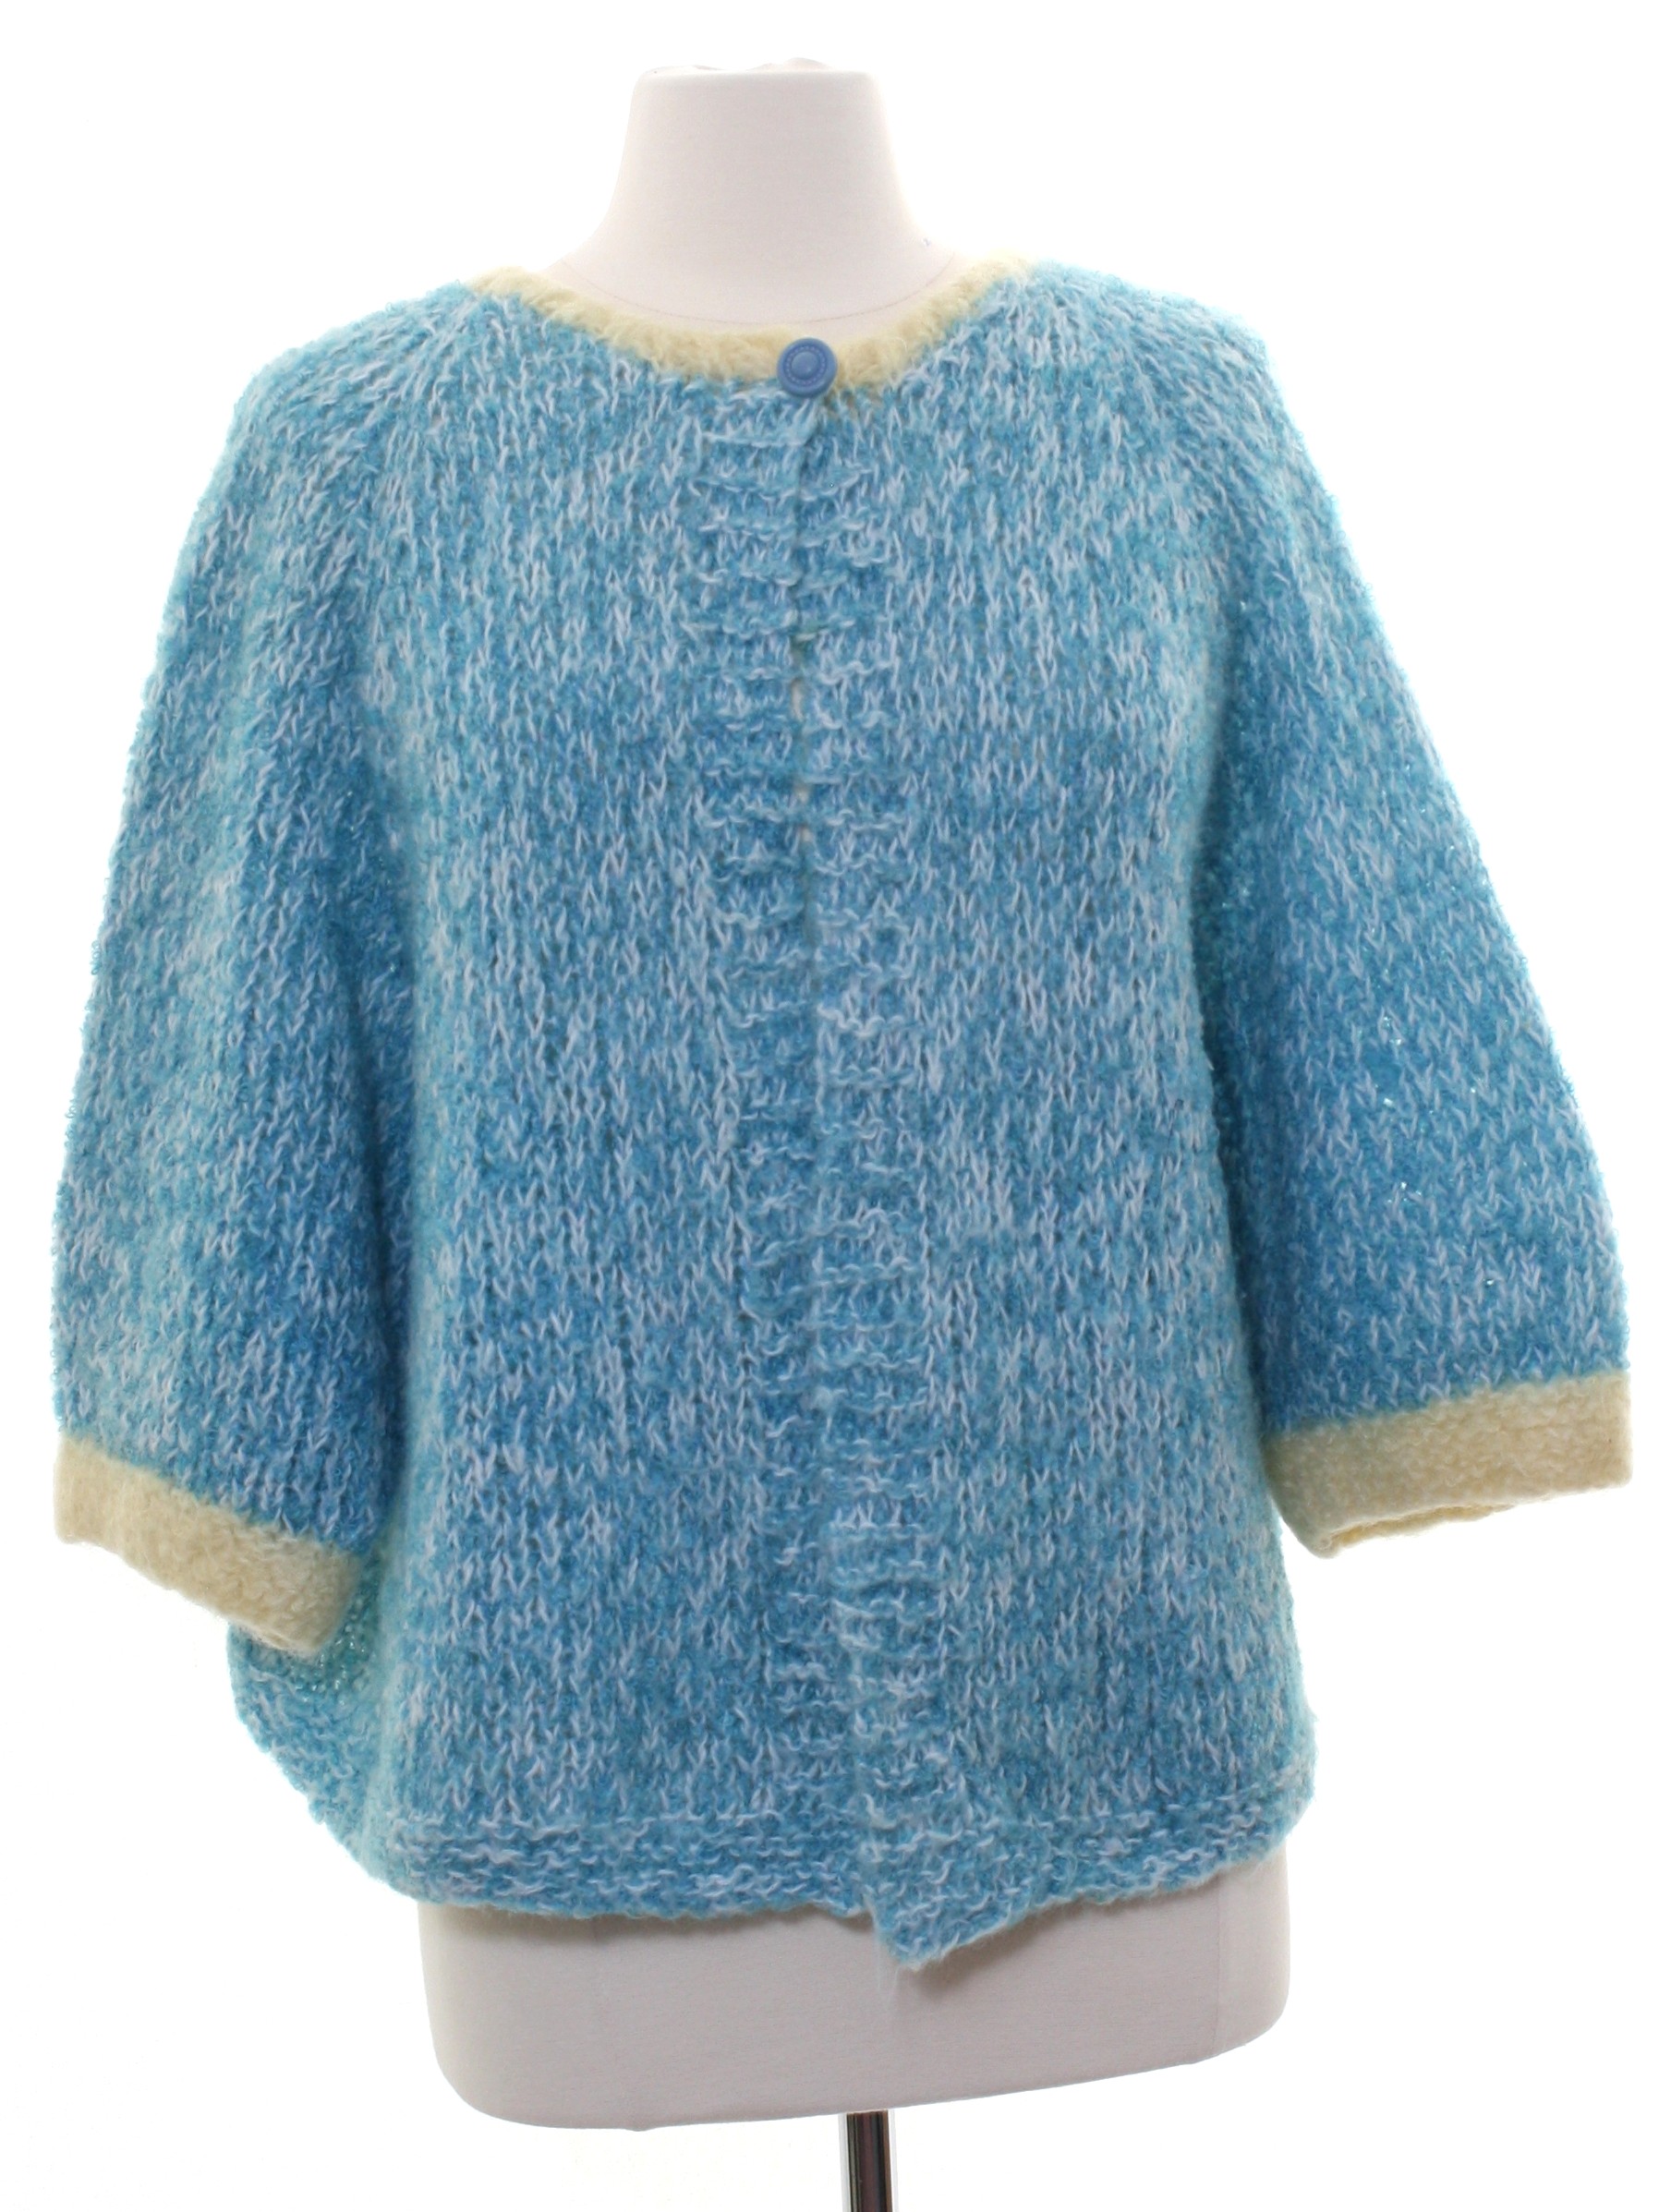 Retro 1960's Sweater (Hand Knit) : 60s style (possibly made in 70s ...